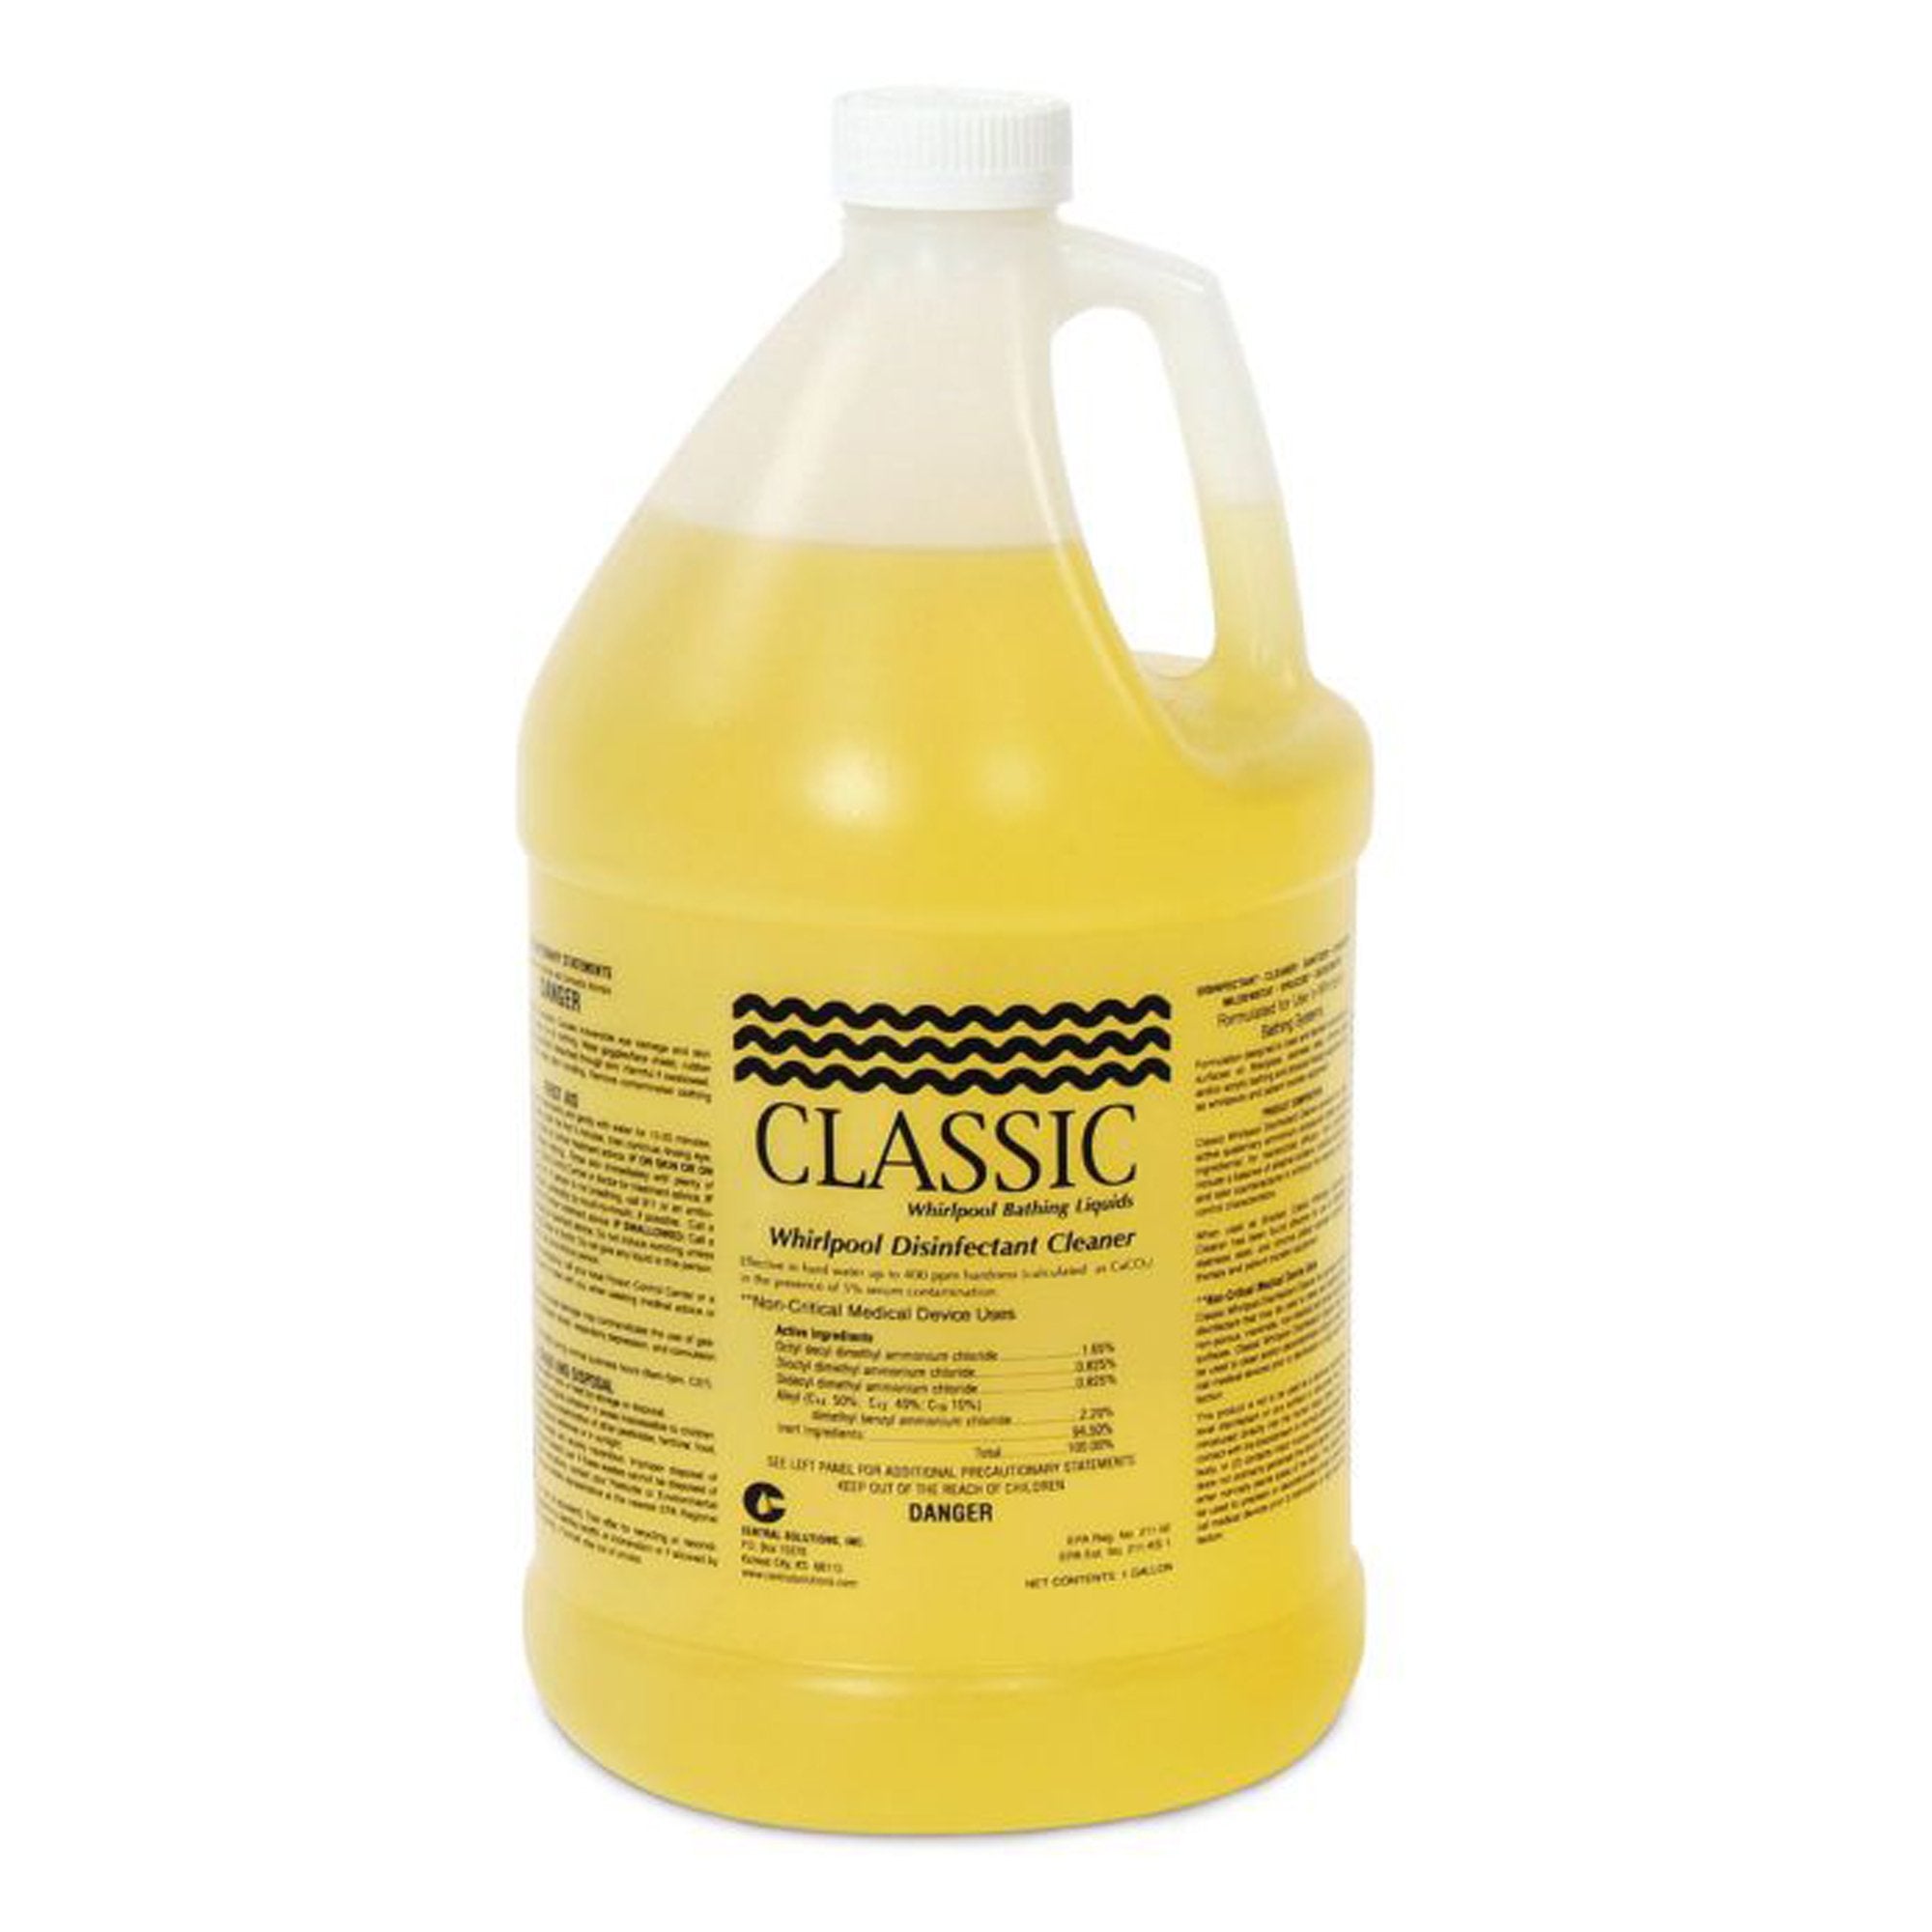 Classic® Surface Disinfectant Cleaner Quaternary Based Manual Pour Liquid 1 gal. Jug Floral Scent NonSterile